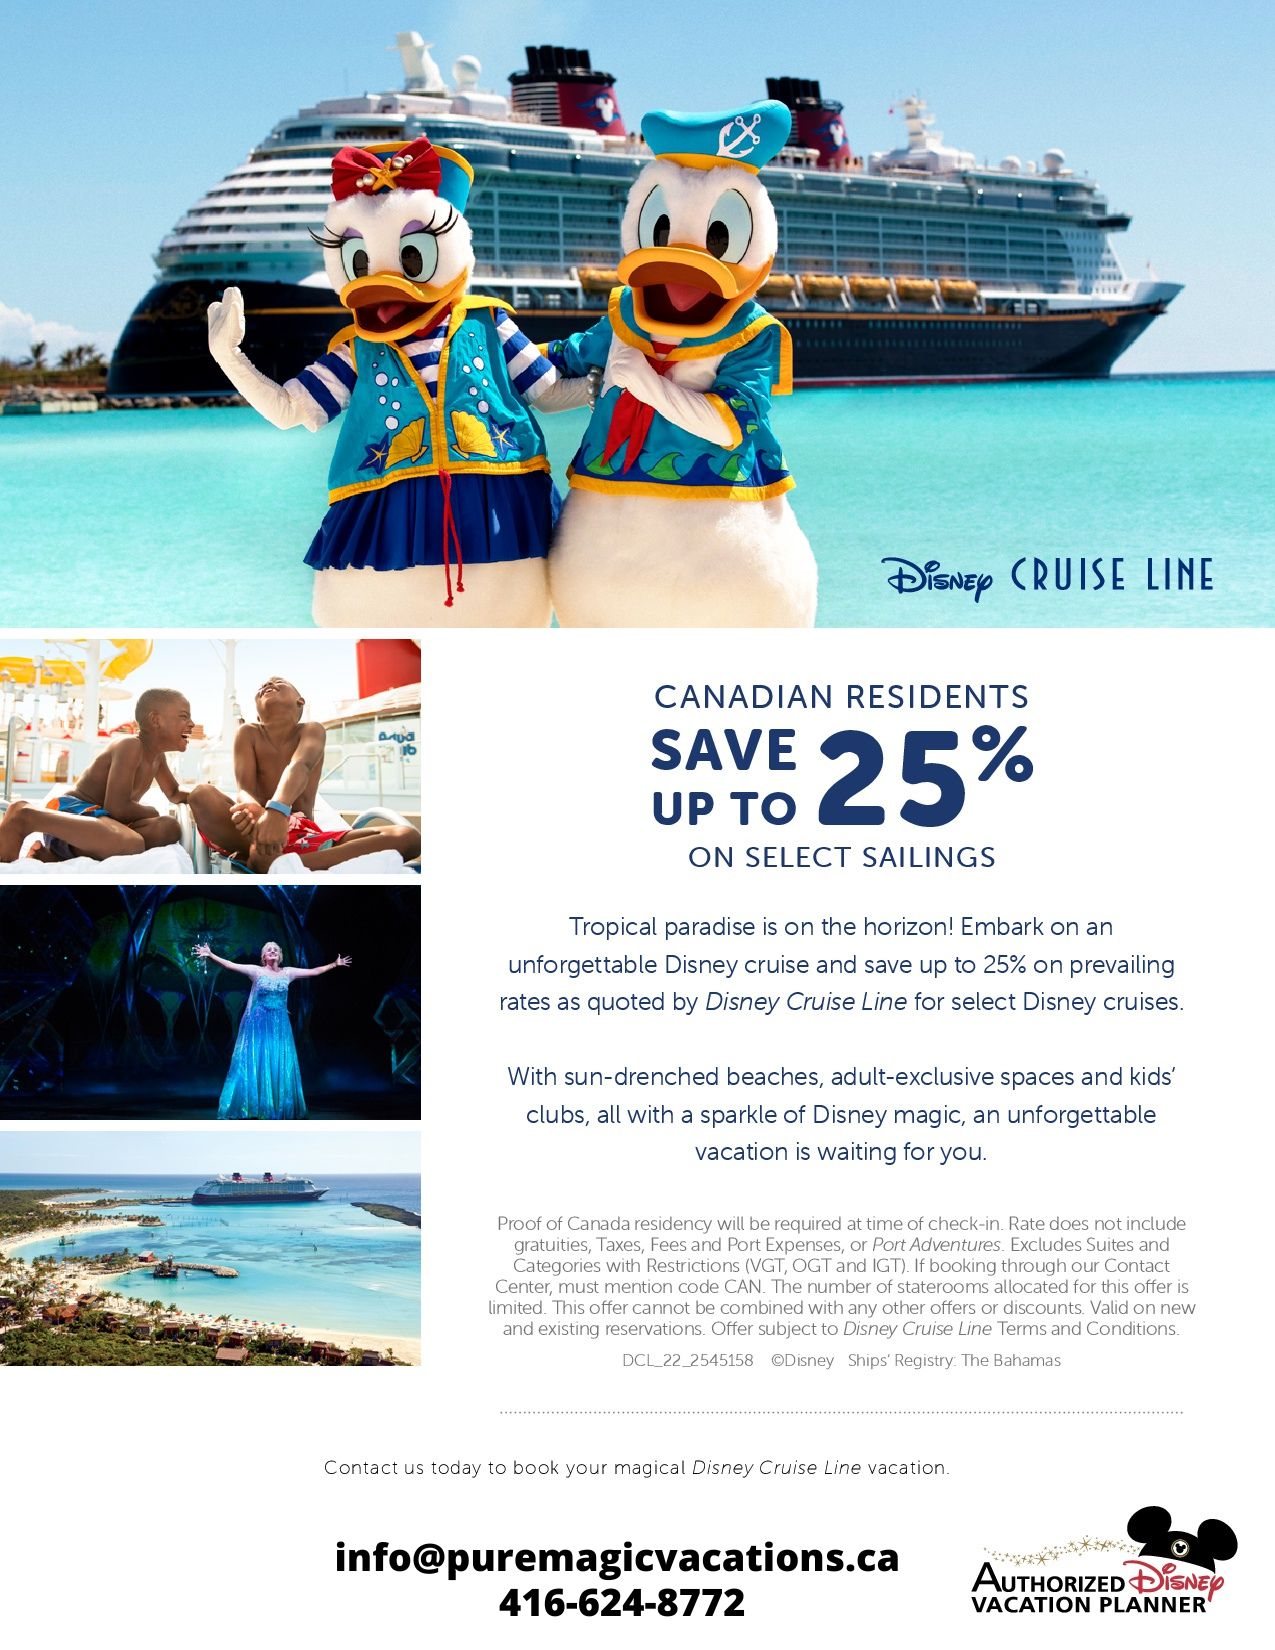 Canadian Residents Save up to 25% on select sailings